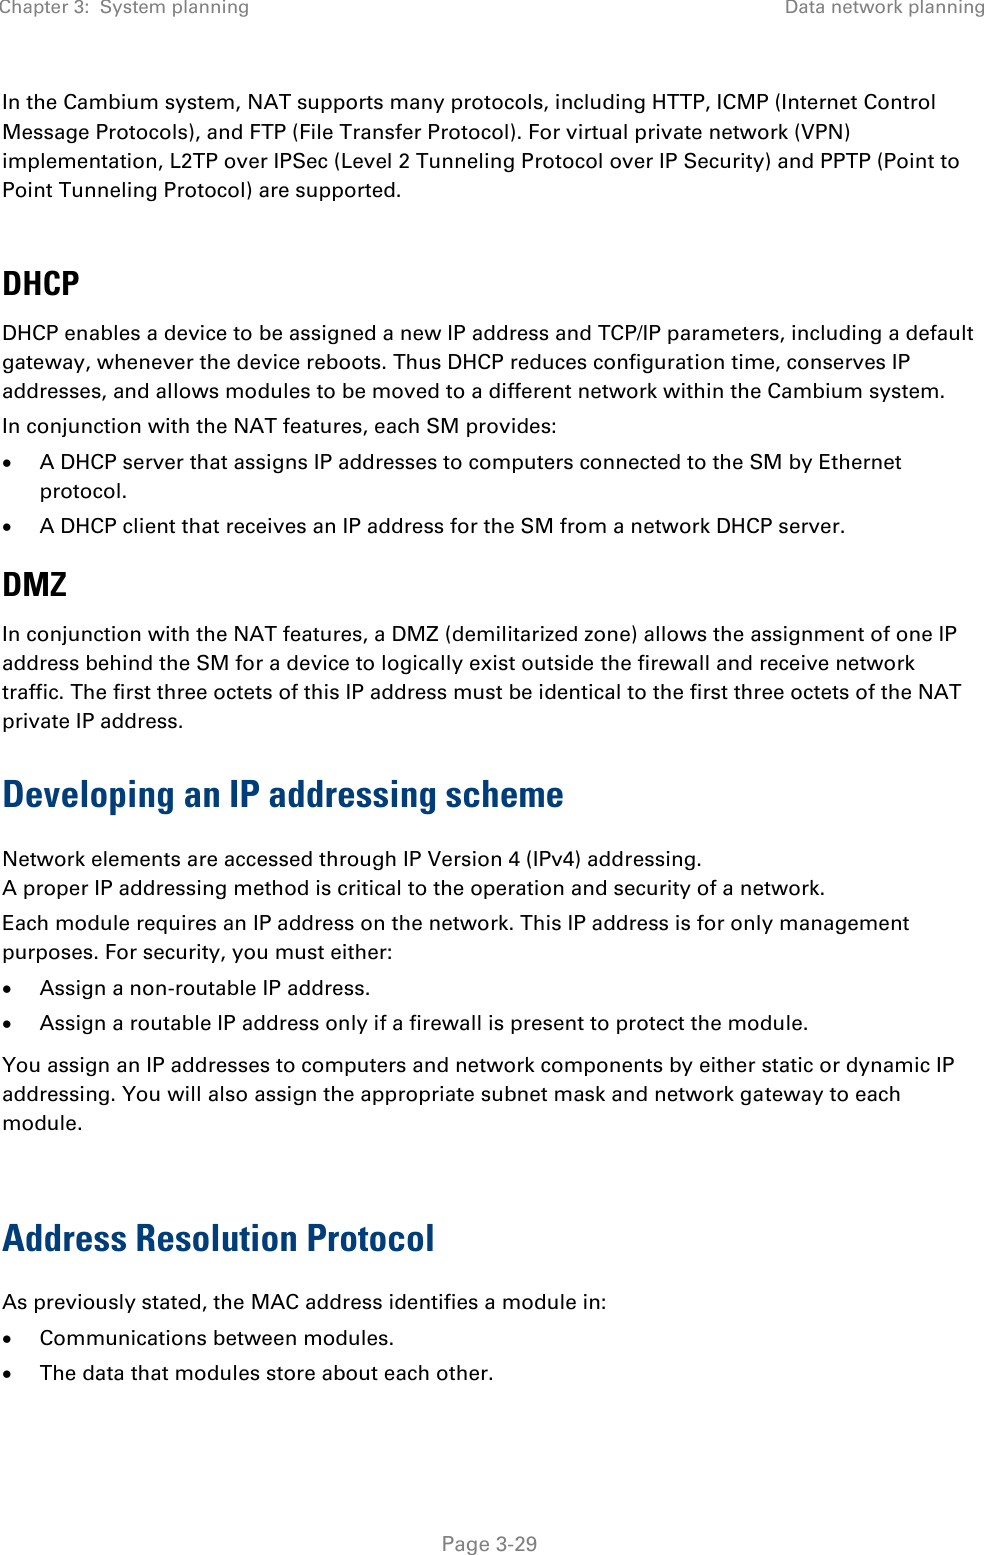 Chapter 3:  System planning Data network planning   Page 3-29 In the Cambium system, NAT supports many protocols, including HTTP, ICMP (Internet Control Message Protocols), and FTP (File Transfer Protocol). For virtual private network (VPN) implementation, L2TP over IPSec (Level 2 Tunneling Protocol over IP Security) and PPTP (Point to Point Tunneling Protocol) are supported.   DHCP DHCP enables a device to be assigned a new IP address and TCP/IP parameters, including a default gateway, whenever the device reboots. Thus DHCP reduces configuration time, conserves IP addresses, and allows modules to be moved to a different network within the Cambium system. In conjunction with the NAT features, each SM provides:  A DHCP server that assigns IP addresses to computers connected to the SM by Ethernet protocol.  A DHCP client that receives an IP address for the SM from a network DHCP server. DMZ In conjunction with the NAT features, a DMZ (demilitarized zone) allows the assignment of one IP address behind the SM for a device to logically exist outside the firewall and receive network traffic. The first three octets of this IP address must be identical to the first three octets of the NAT private IP address. Developing an IP addressing scheme Network elements are accessed through IP Version 4 (IPv4) addressing.  A proper IP addressing method is critical to the operation and security of a network. Each module requires an IP address on the network. This IP address is for only management purposes. For security, you must either:  Assign a non-routable IP address.  Assign a routable IP address only if a firewall is present to protect the module.  You assign an IP addresses to computers and network components by either static or dynamic IP addressing. You will also assign the appropriate subnet mask and network gateway to each module.   Address Resolution Protocol As previously stated, the MAC address identifies a module in:  Communications between modules.  The data that modules store about each other. 